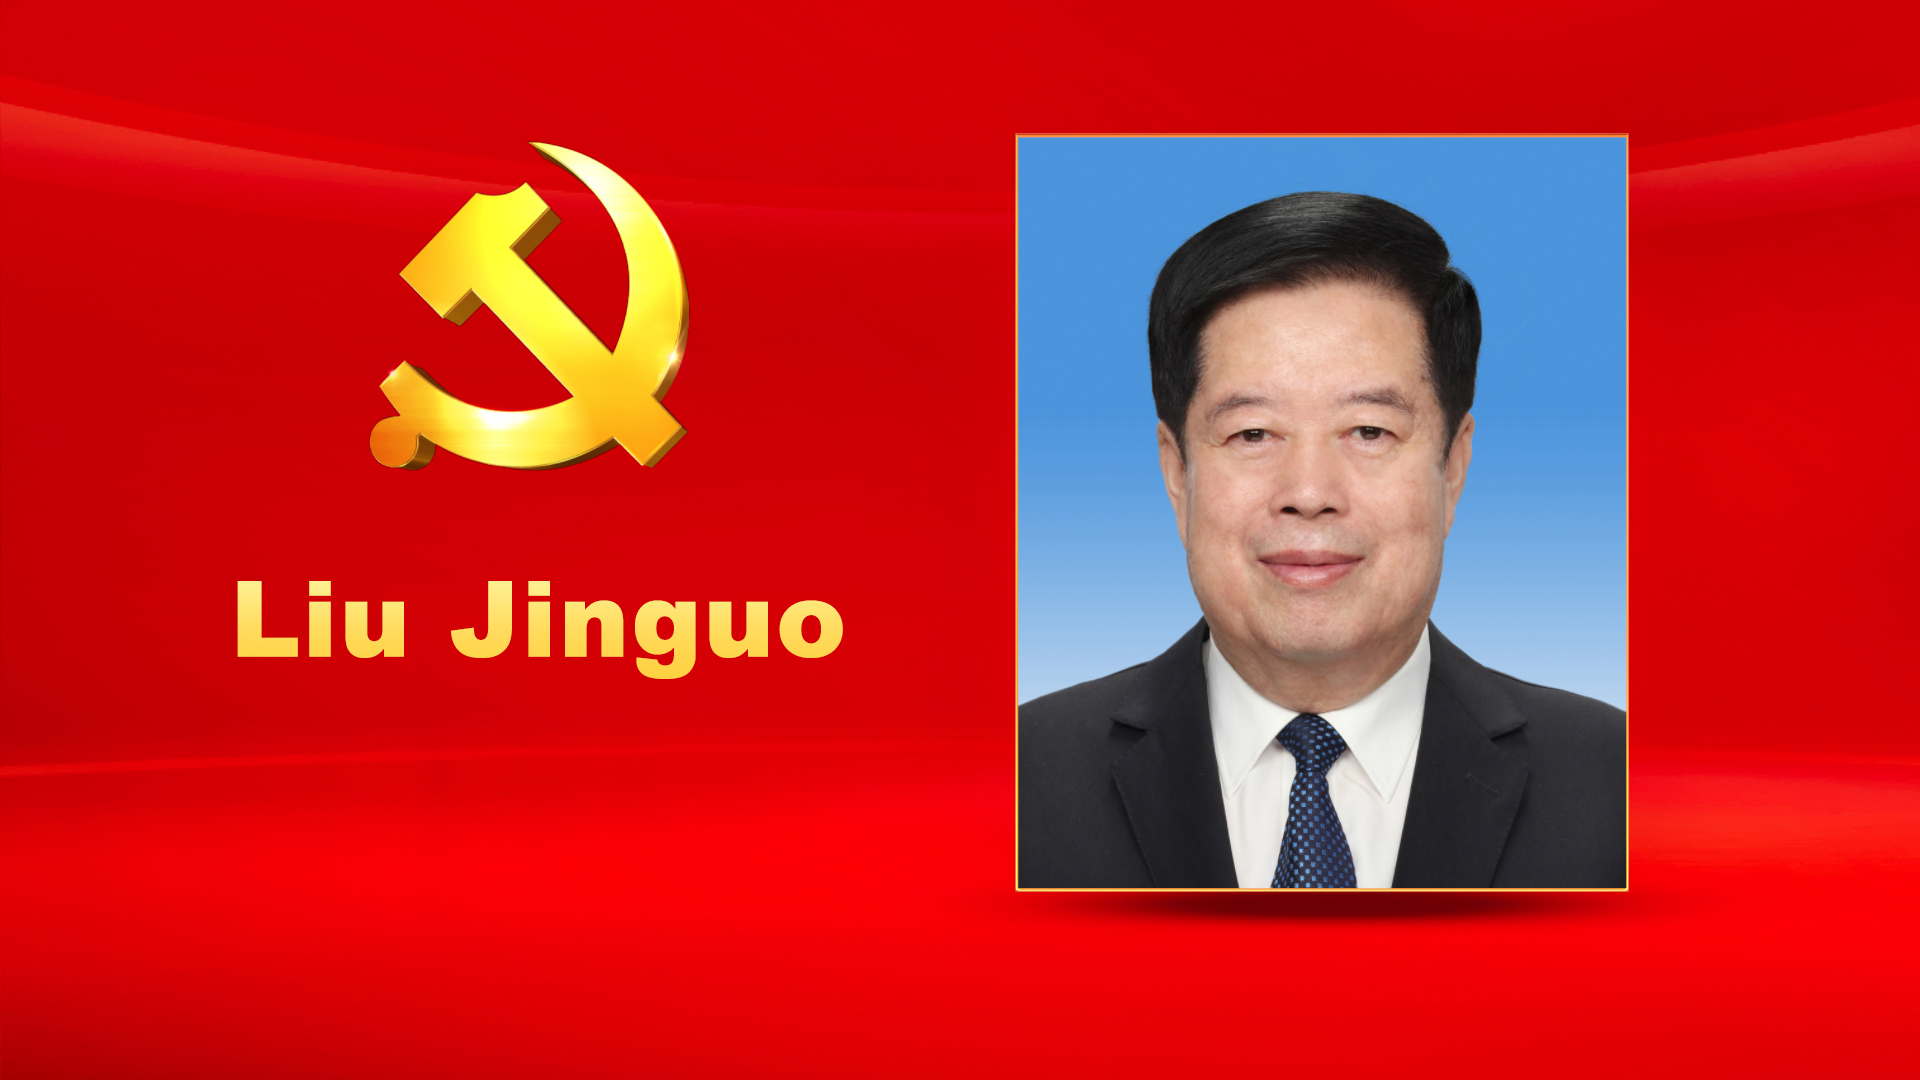 Liu Jinguo, male, Han ethnicity, was born in April 1955 and is from Changli, Hebei Province. He began his first job in December 1976 and joined the Communist Party of China (CPC) in September 1975. He received an undergraduate education at the Central Party School. Liu is currently a member of the CPC Central Committee Secretariat, Deputy Secretary of the Central Commission for Discipline Inspection, and Vice Chairman of the National Commission of Supervision. He is a Level-I Deputy General Supervisor.